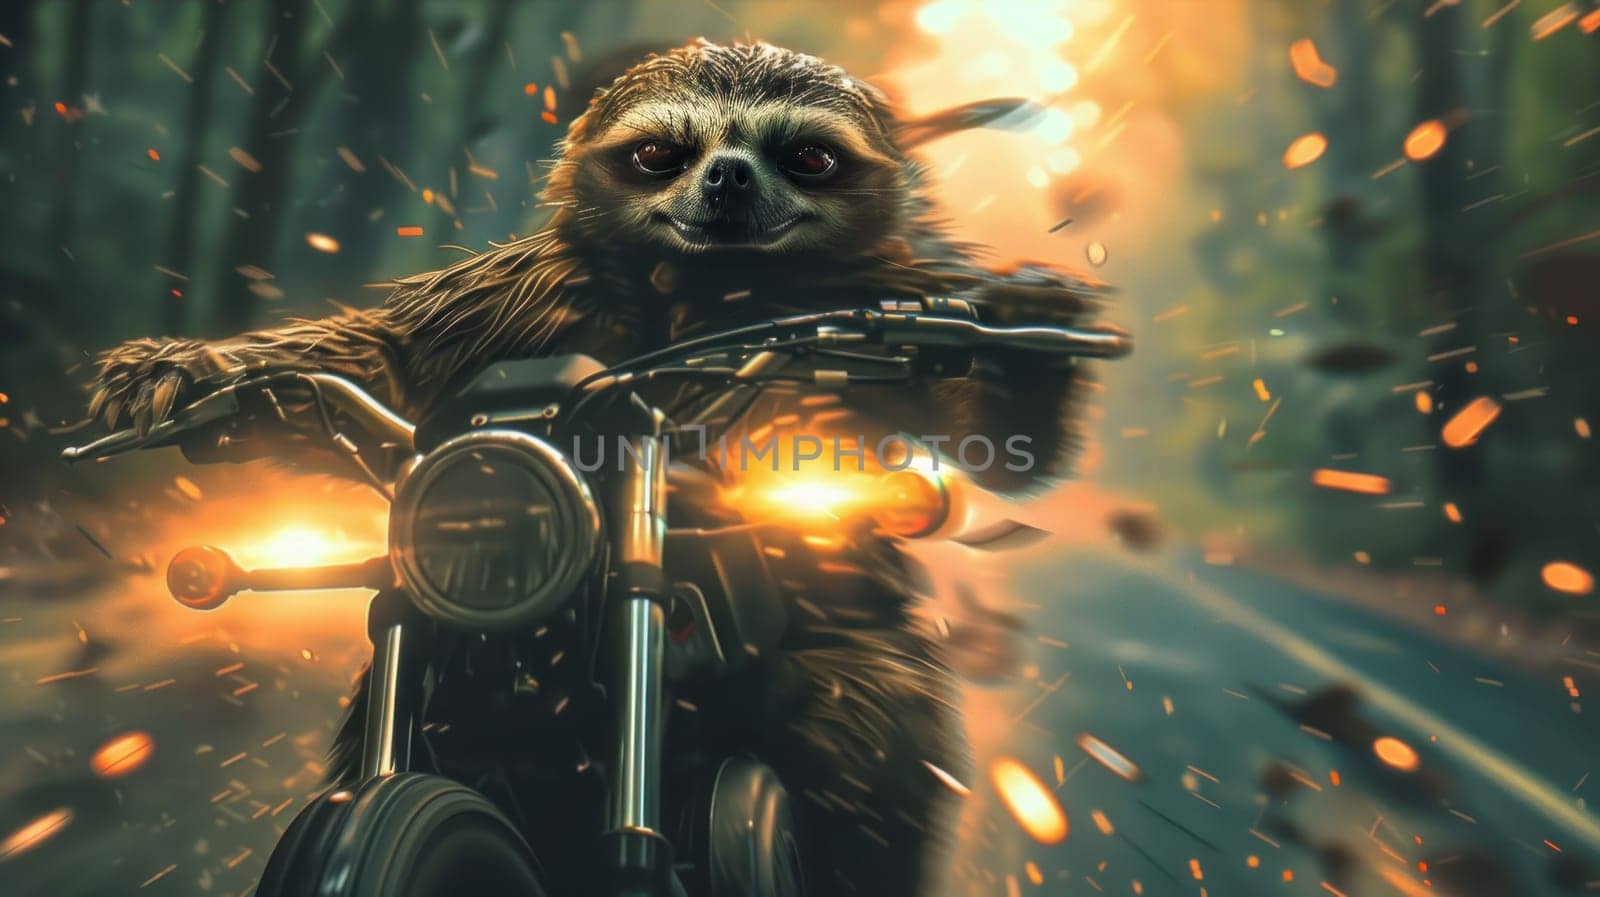 A sloth is riding a motorcycle with a helmet on.